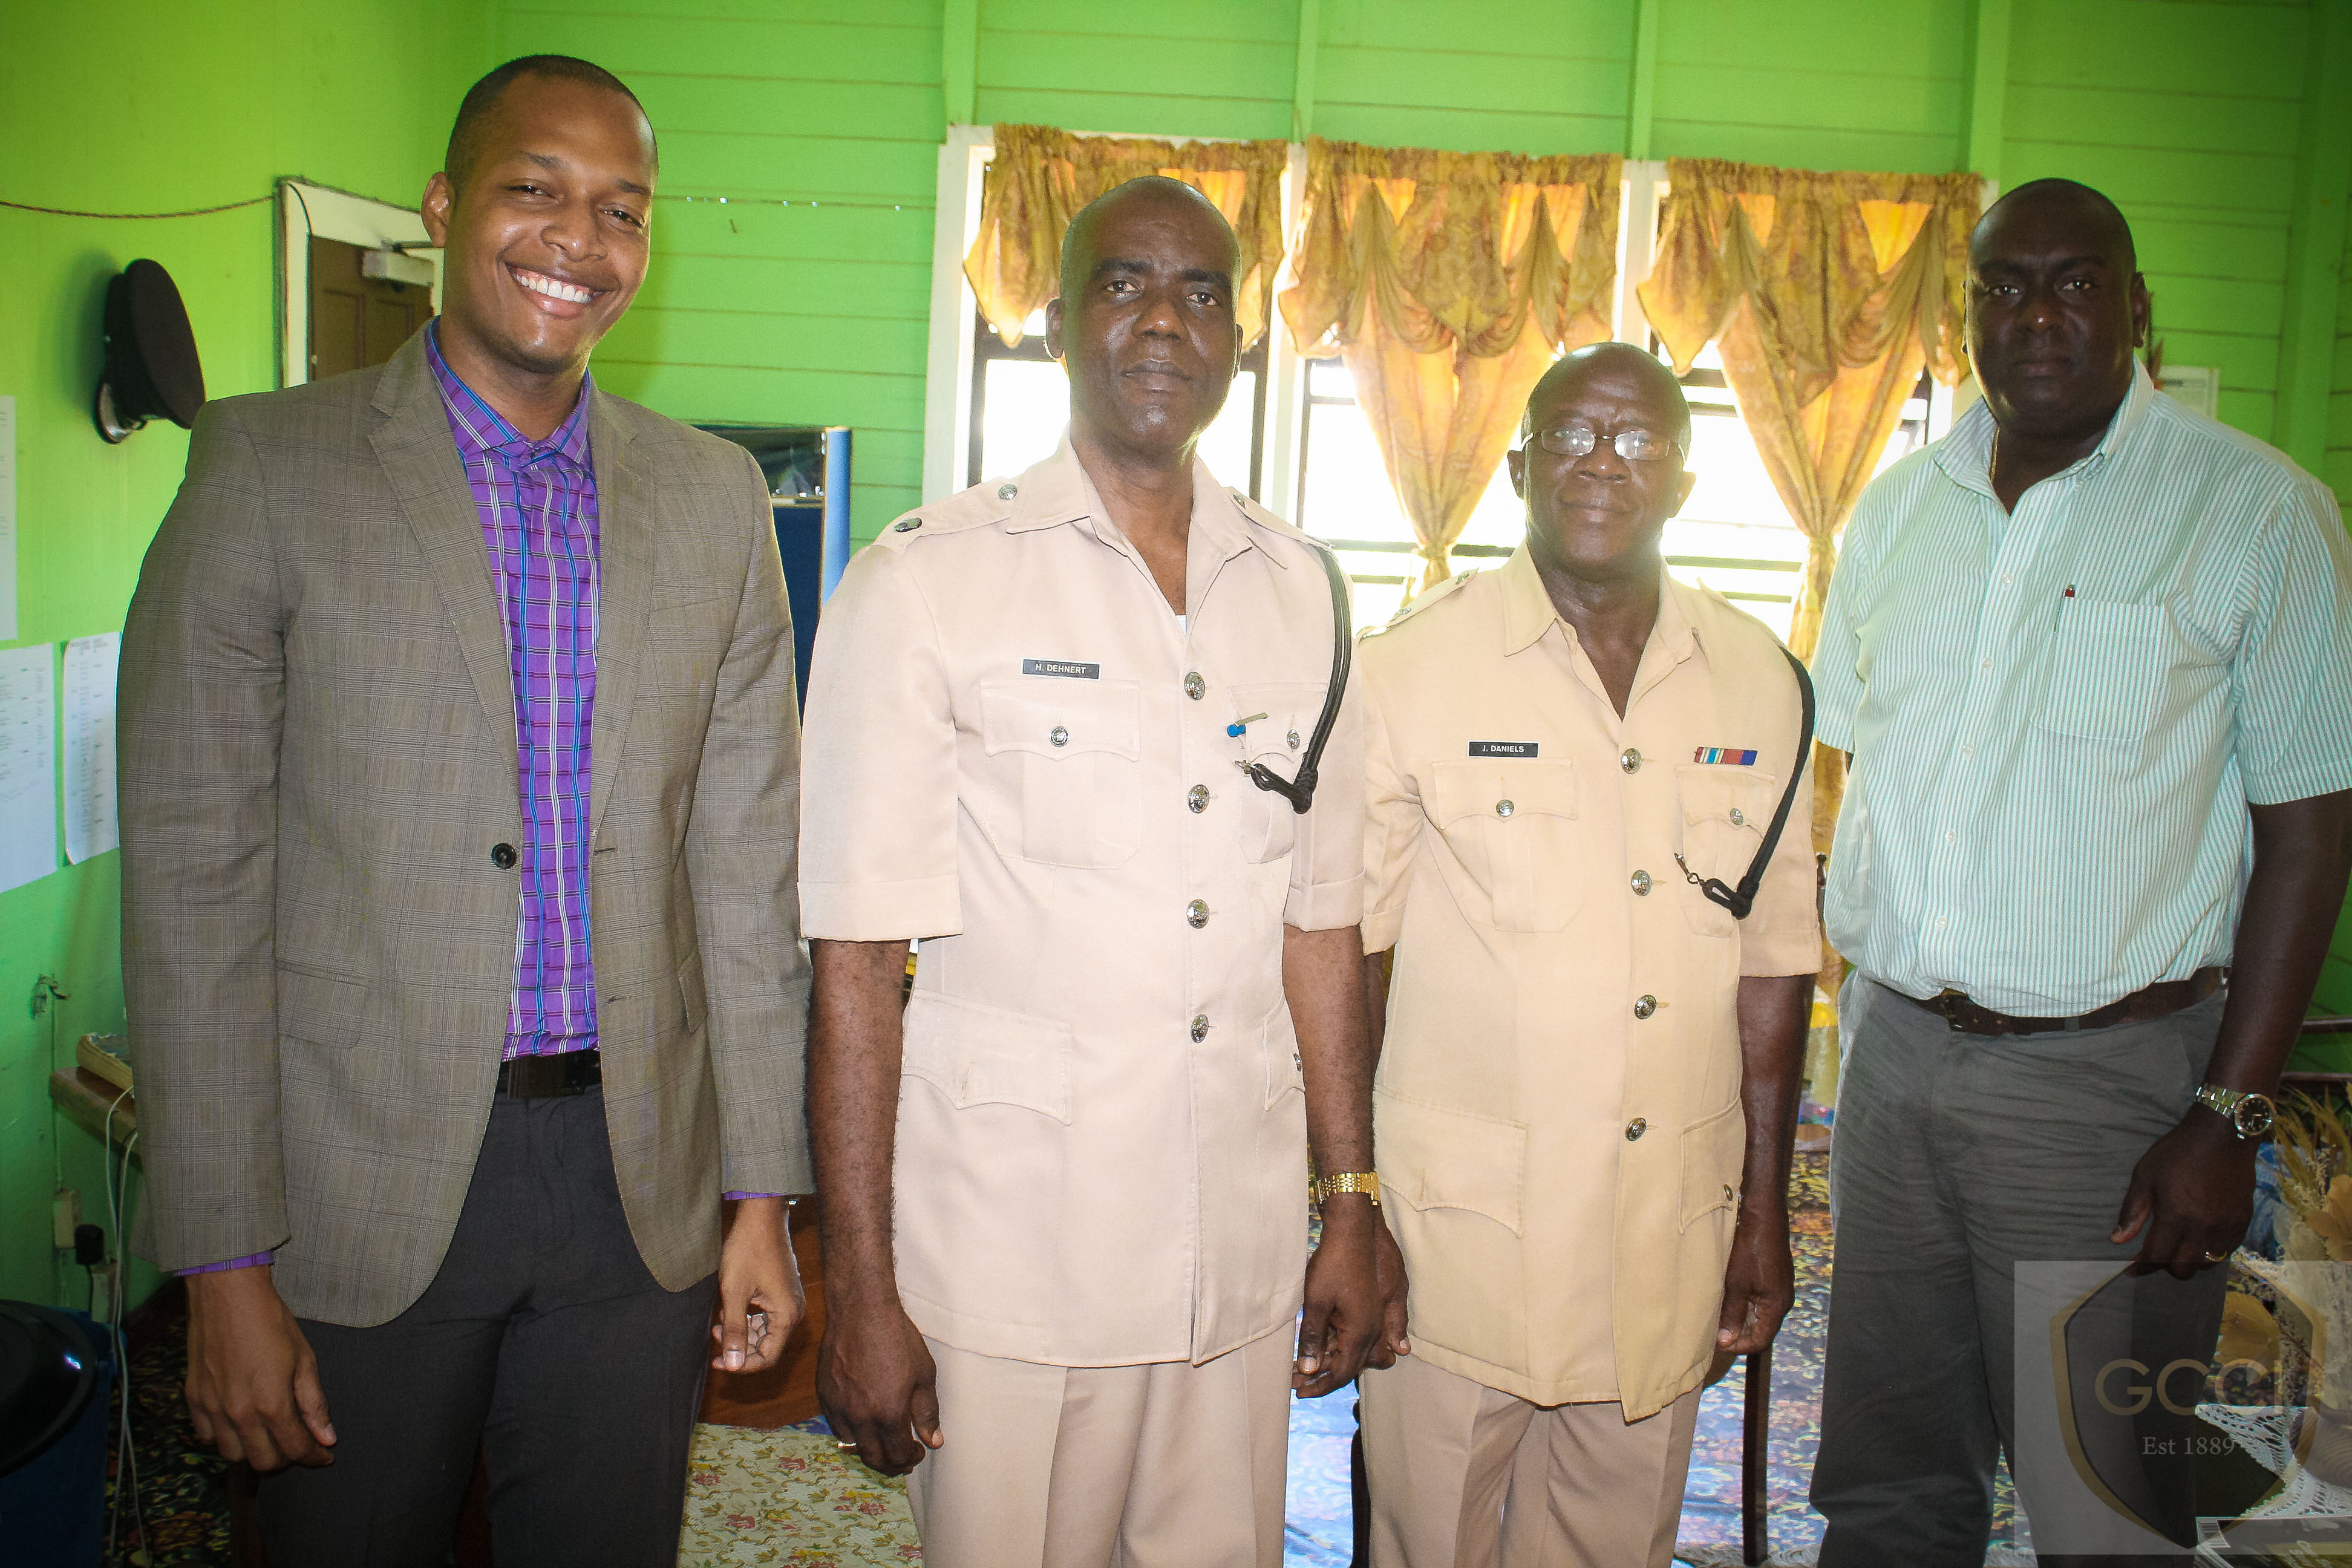 Members of the Georgetown Chamber of Commerce & Industry, meeting with the Traffic Chief, Superintendent of Police, Mr. Hugh Dehnert and Mr. J. Daniels